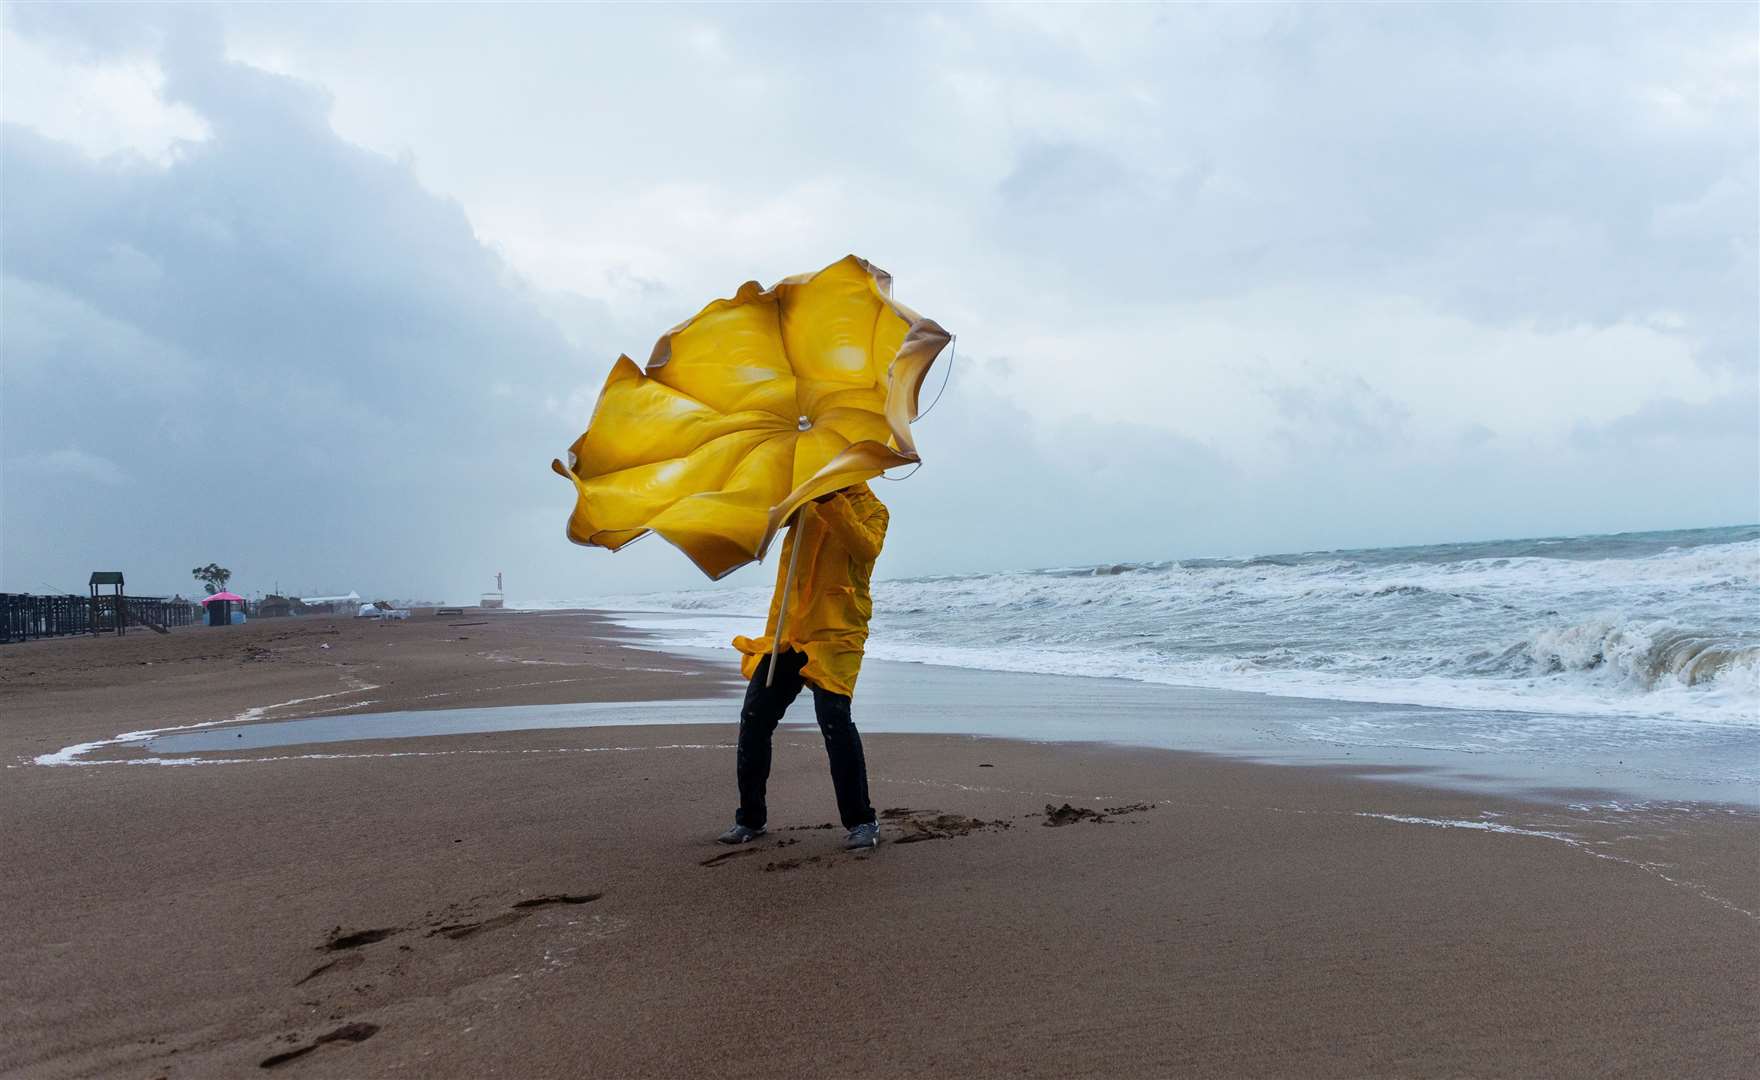 The Met Office acknowledges people’s summer plans may be impacted by the unsettled weather. Image: iStock.